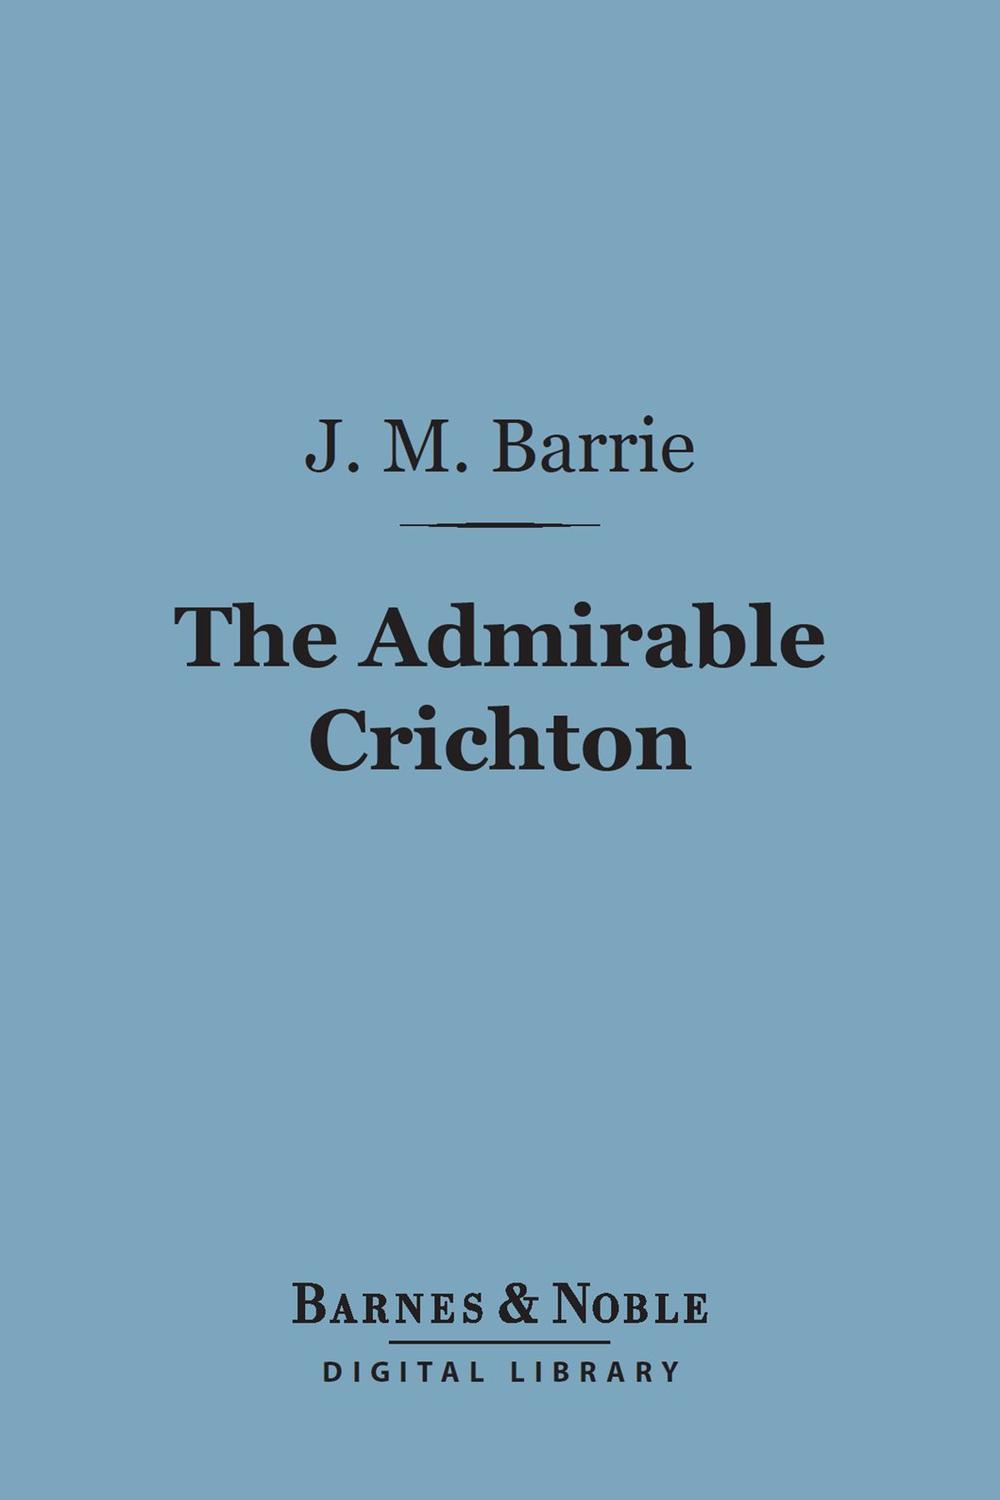 The Admirable Crichton (Barnes & Noble Digital Library) - J. M. Barrie